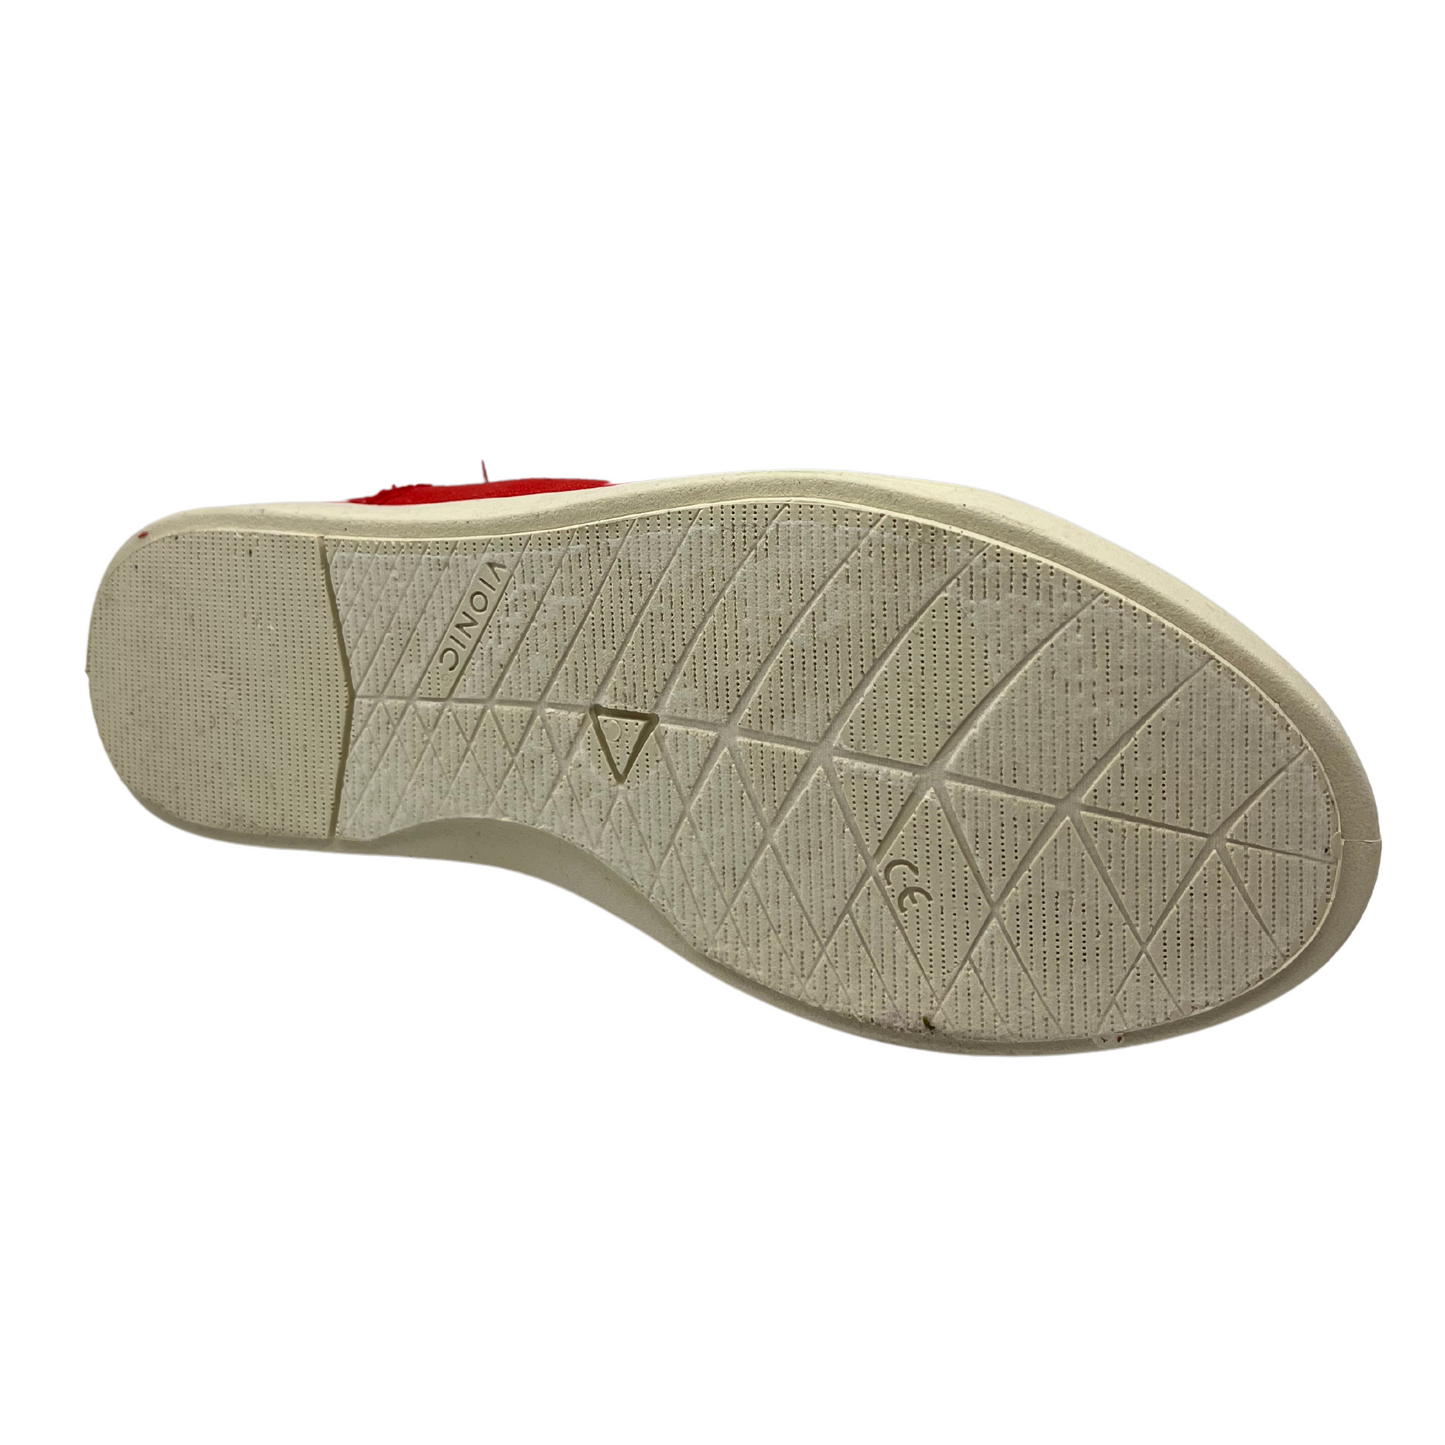 Bottom view of a red canvas sneaker with white rubber outsole